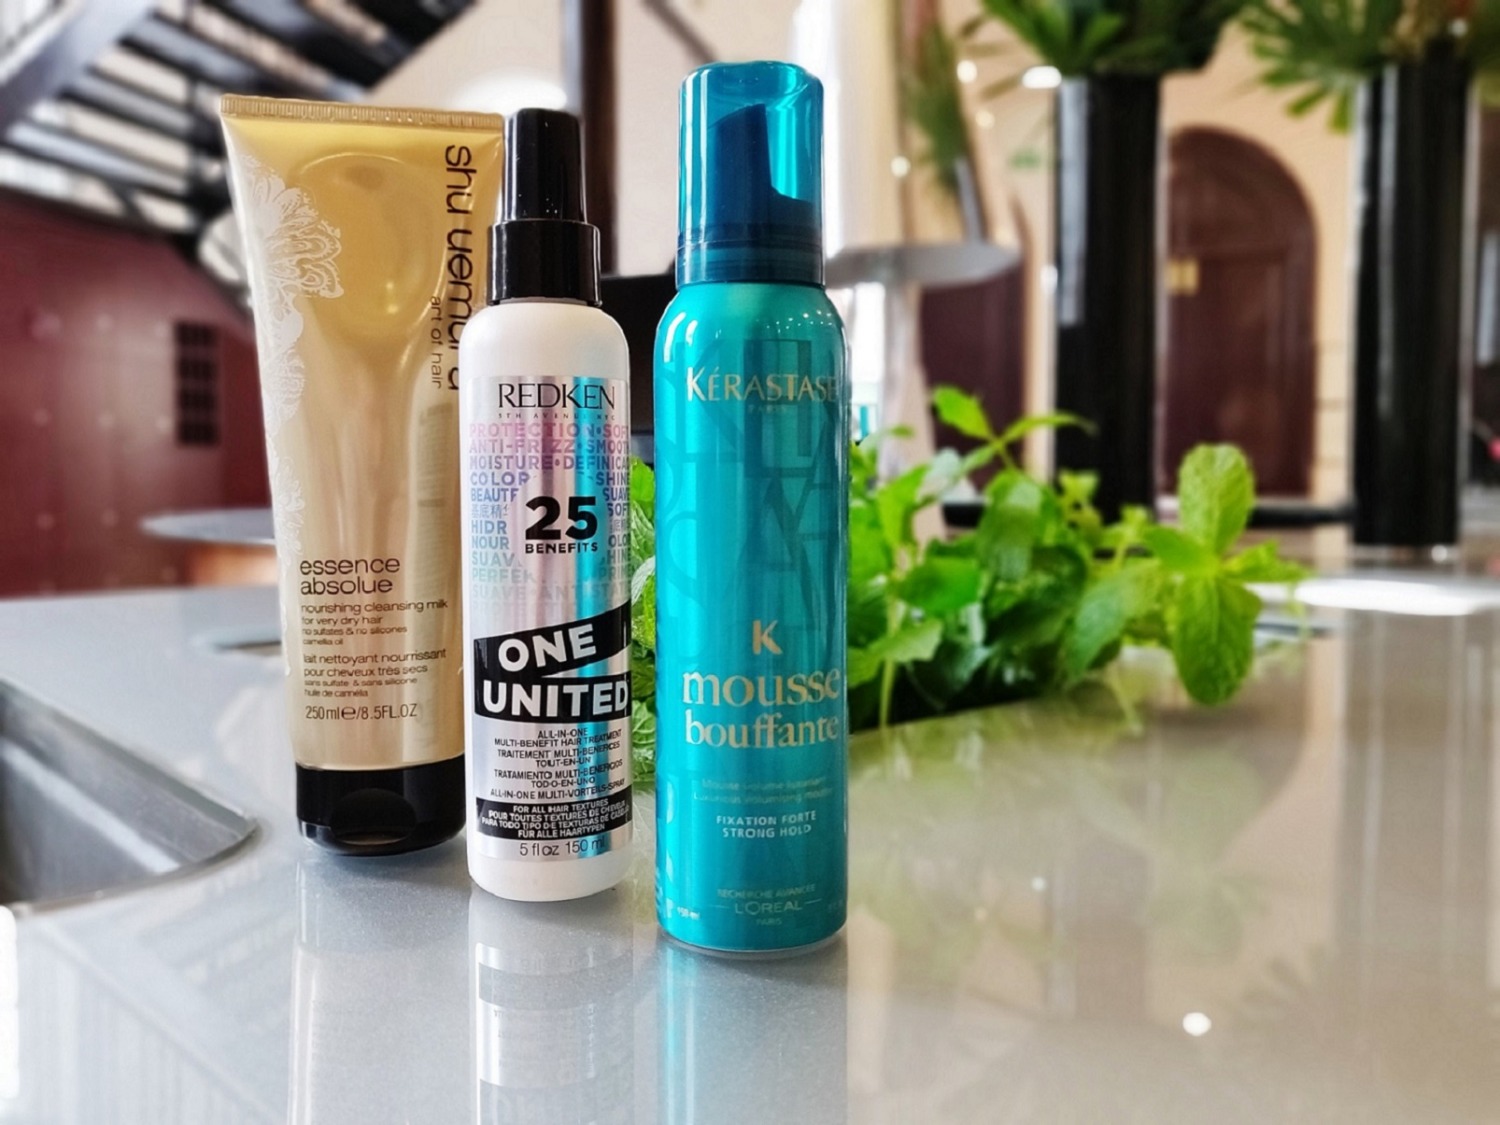 The Chapel’s Favourite Products for Hair Care, Styling, and Protection